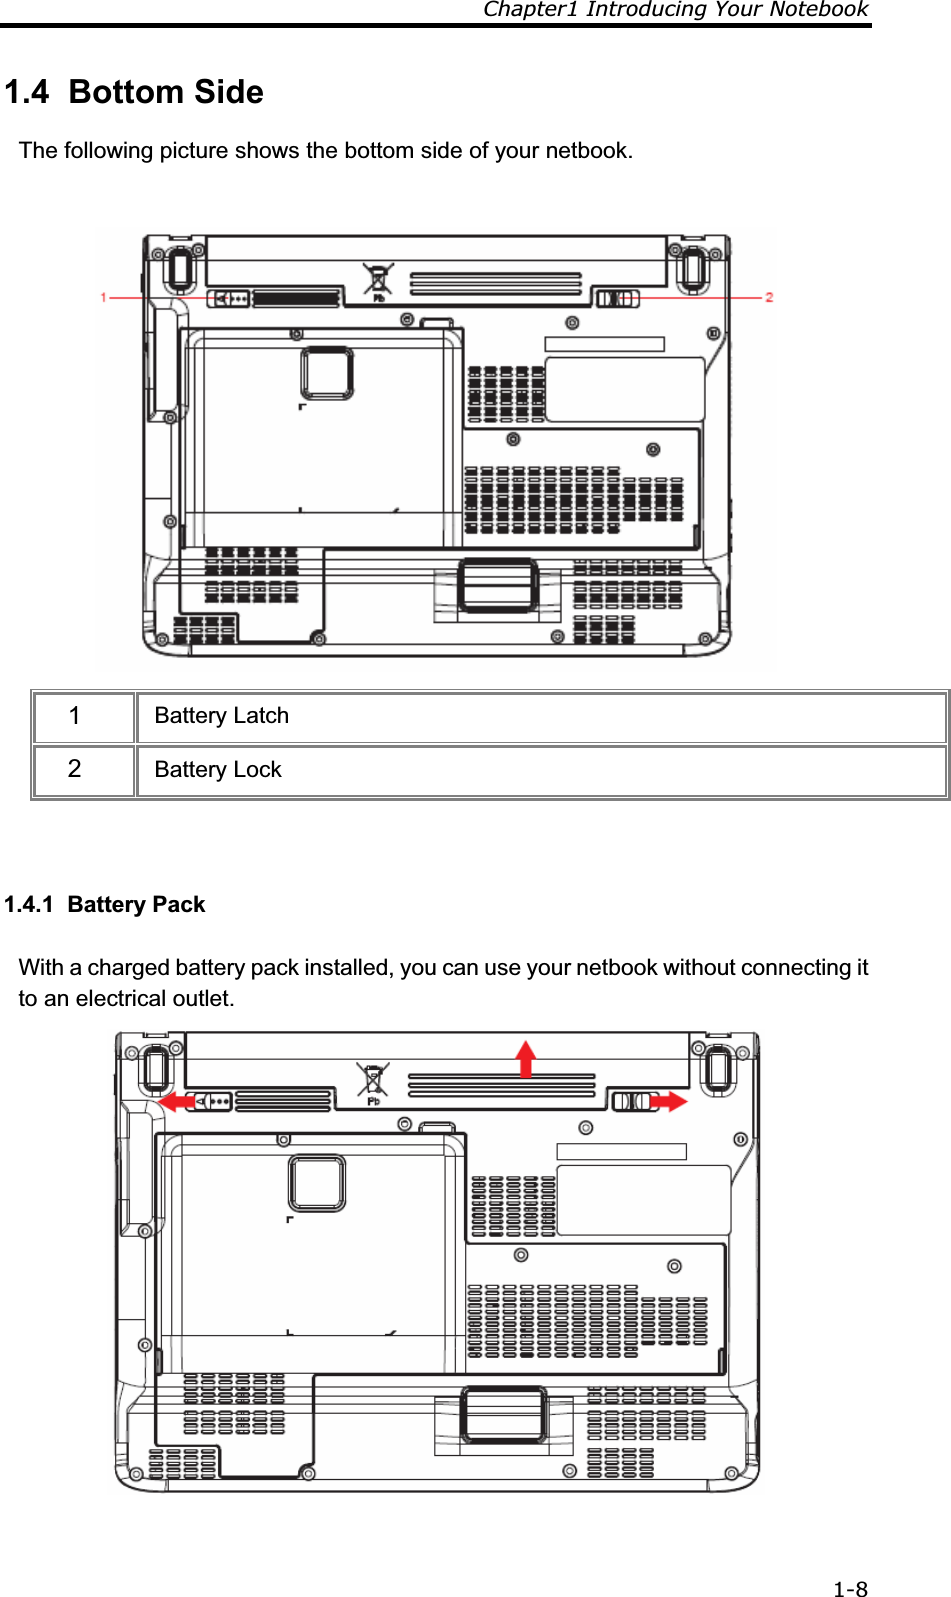 Chapter1 Introducing Your Notebook 1-81.4  Bottom Side The following picture shows the bottom side of your netbook.  1  Battery Latch  2  Battery Lock  1.4.1  Battery Pack With a charged battery pack installed, you can use your netbook without connecting it to an electrical outlet.  